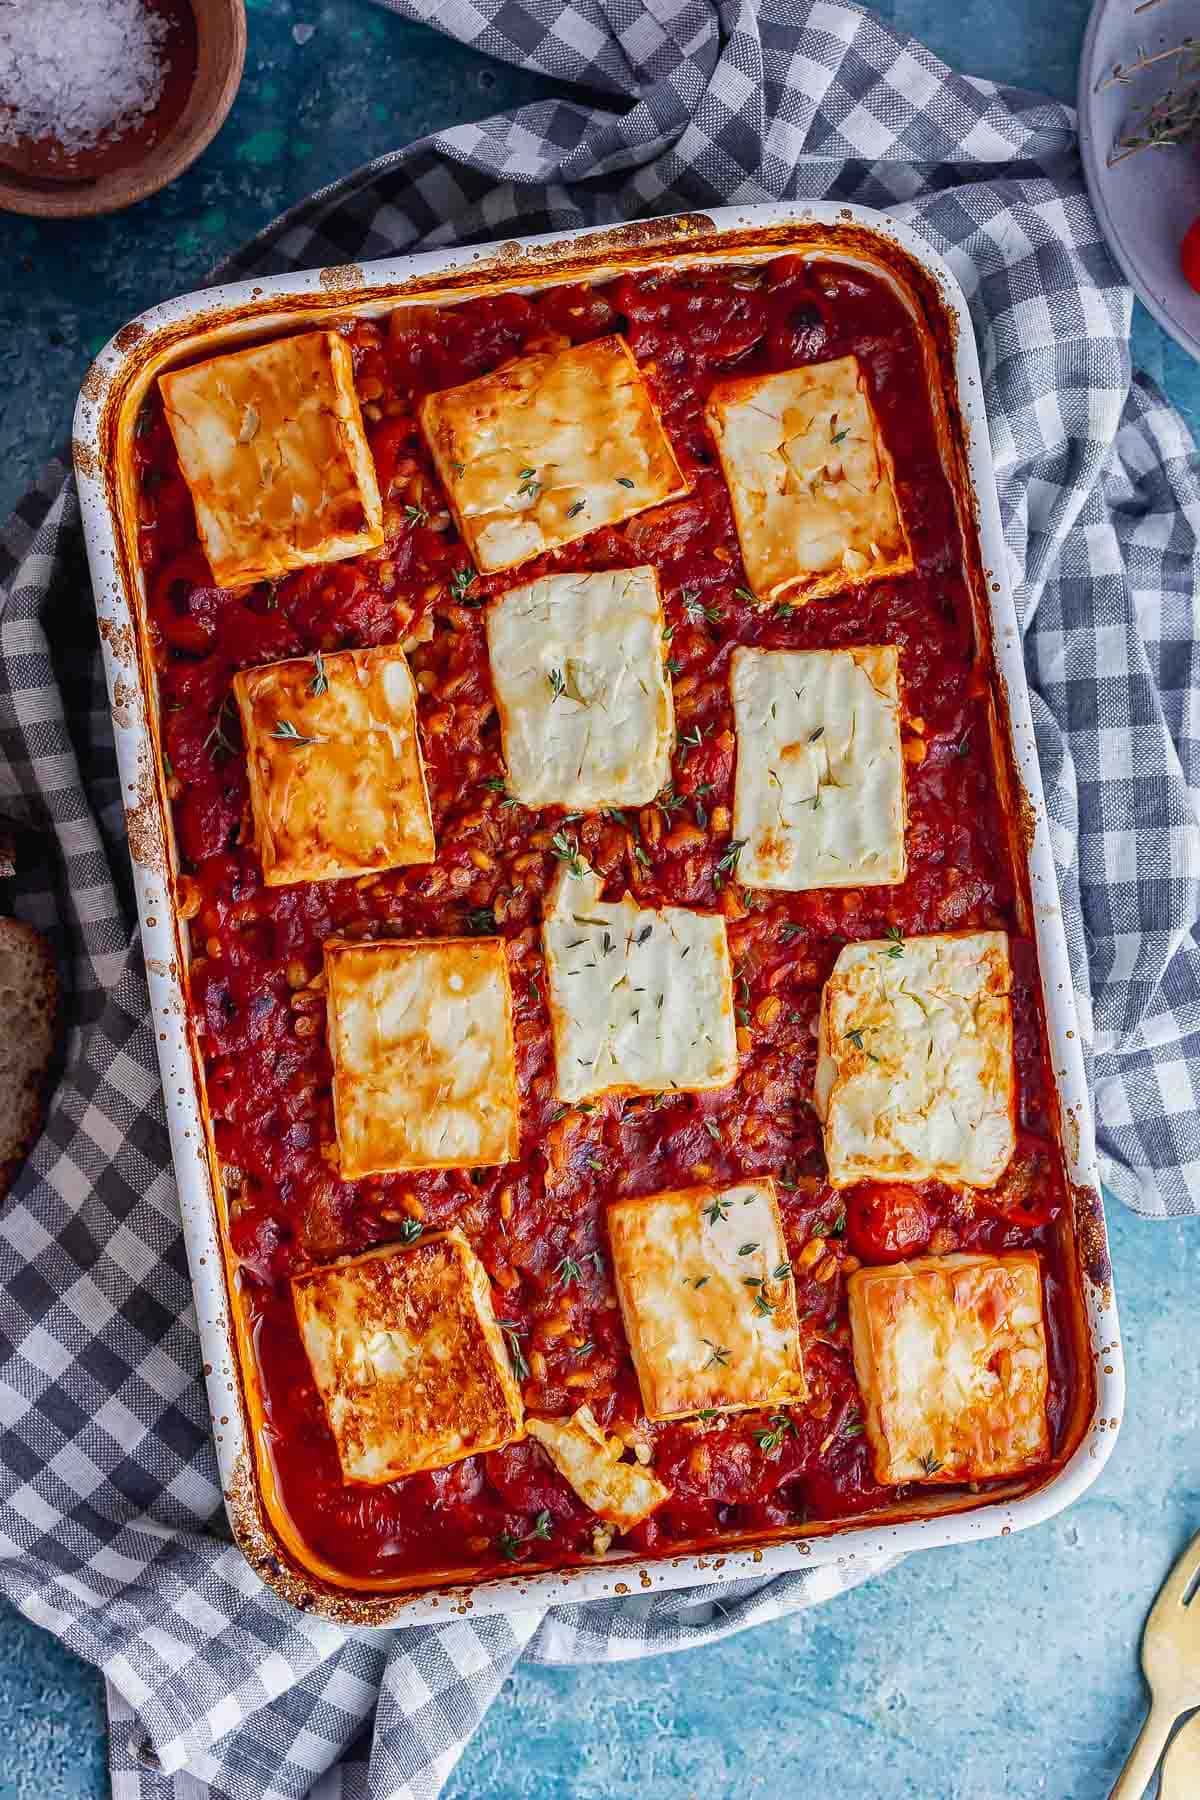 Overhead shot of tomato and feta bake on a checked cloth